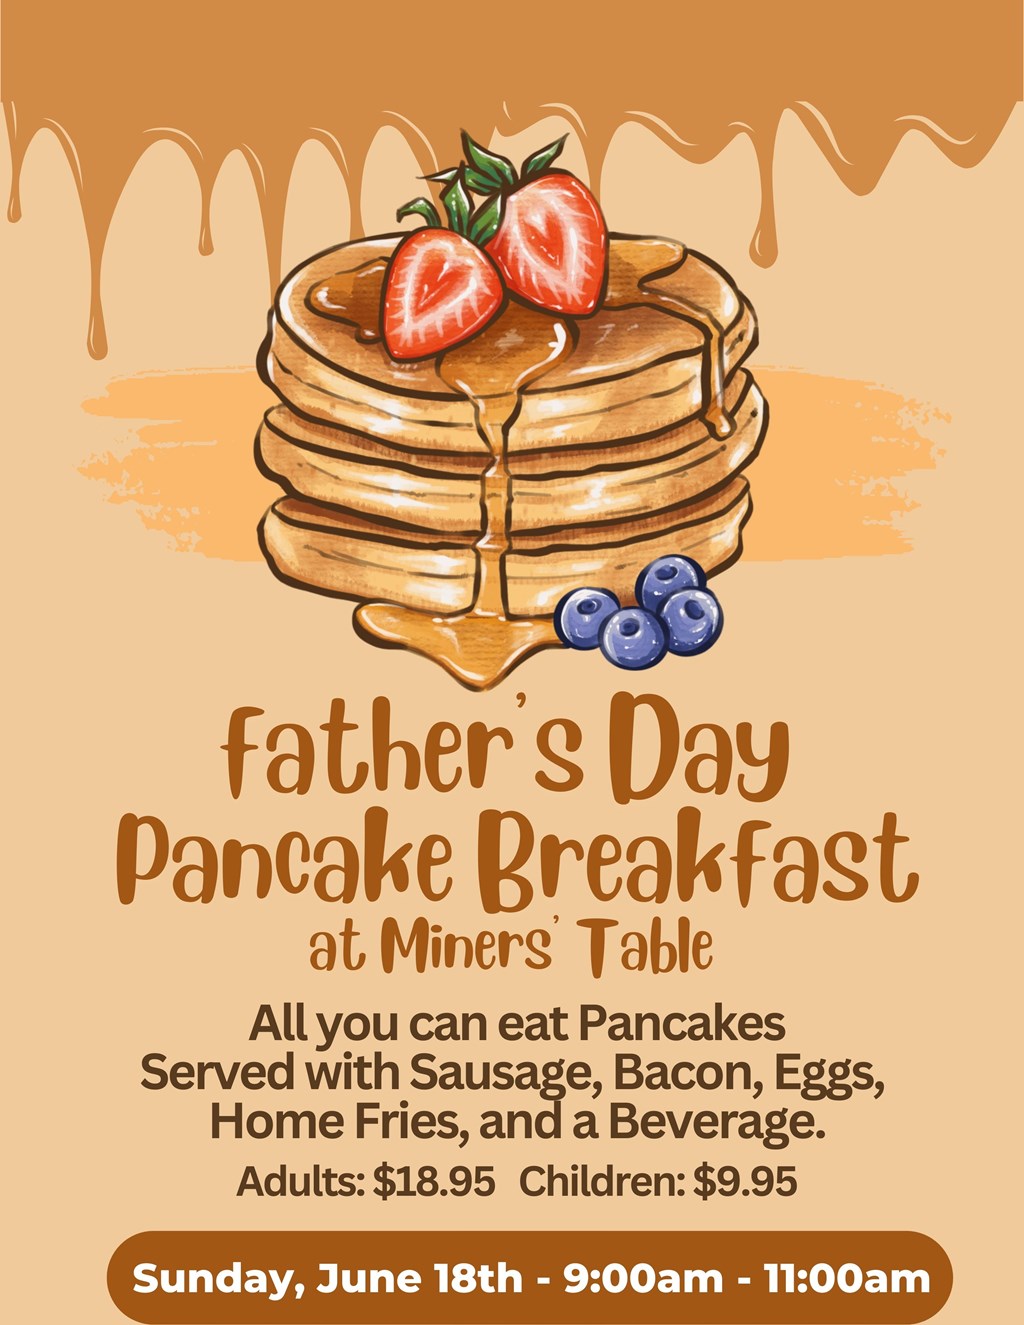 Father's Day Pancake Breakfast at Miner's Table